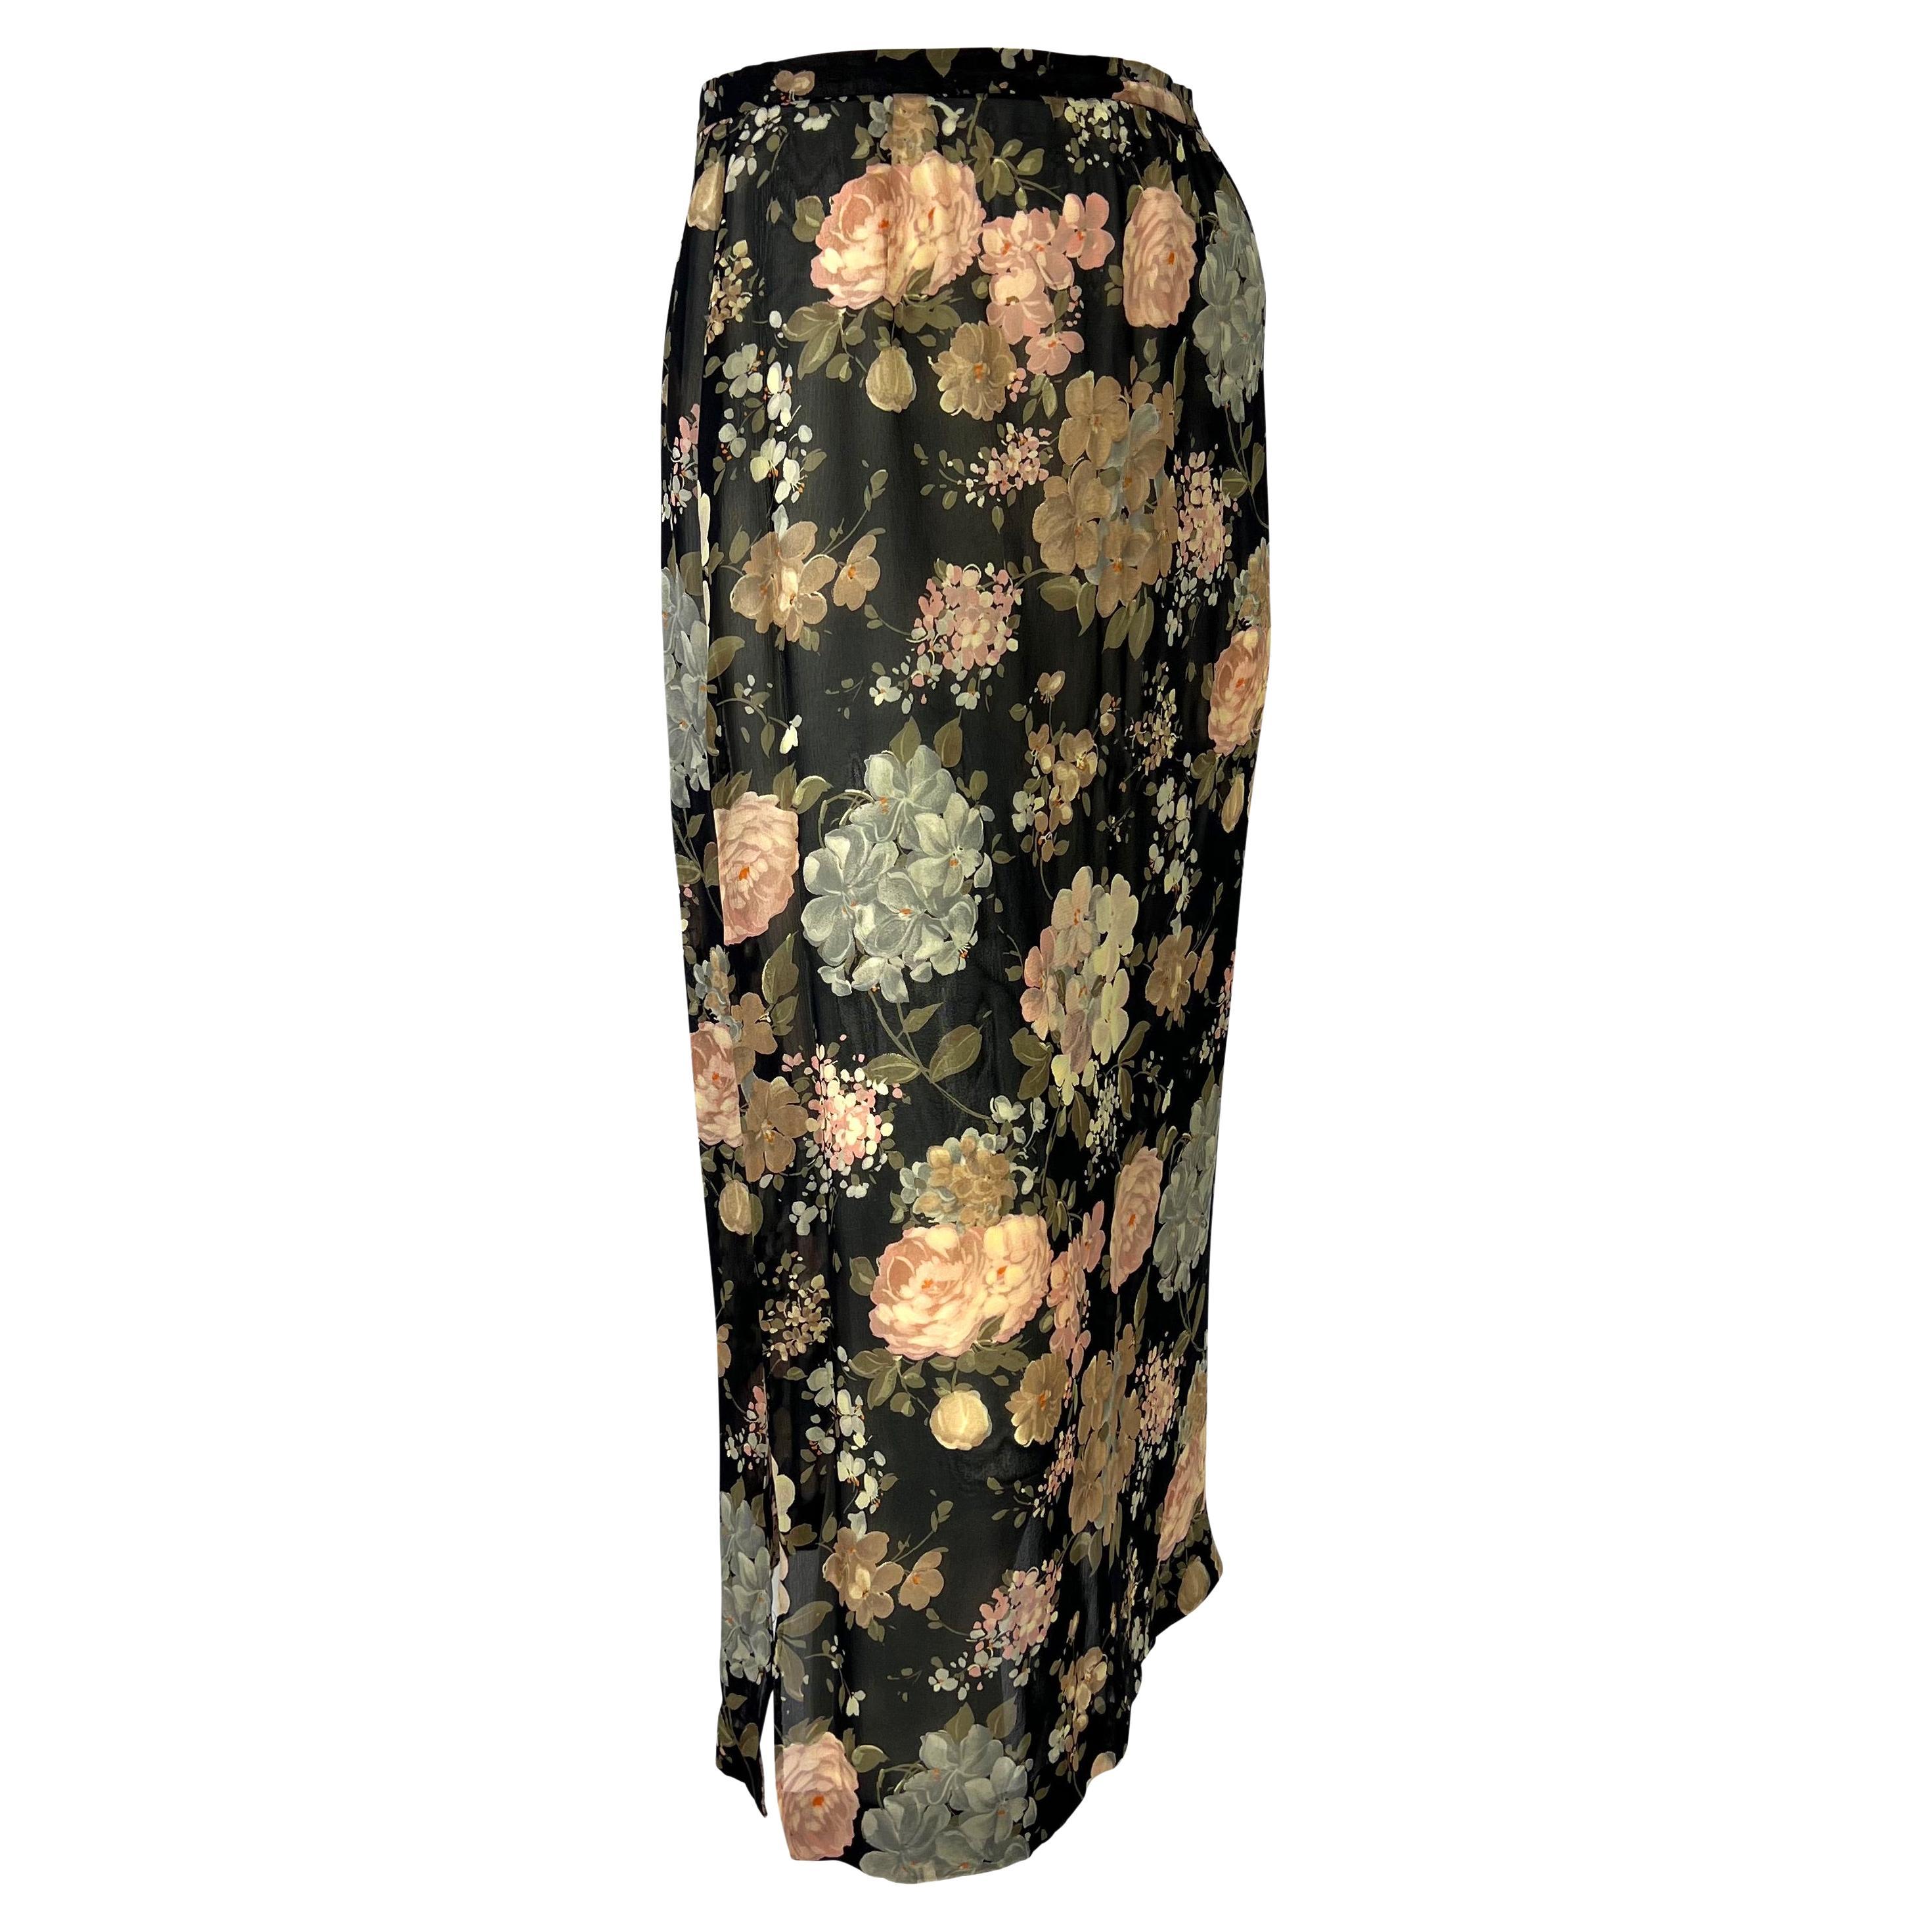 S/S 1997 Dolce & Gabbana Sheer Floral Black Pencil Bodycon Pin-Up Skirt In Excellent Condition For Sale In West Hollywood, CA